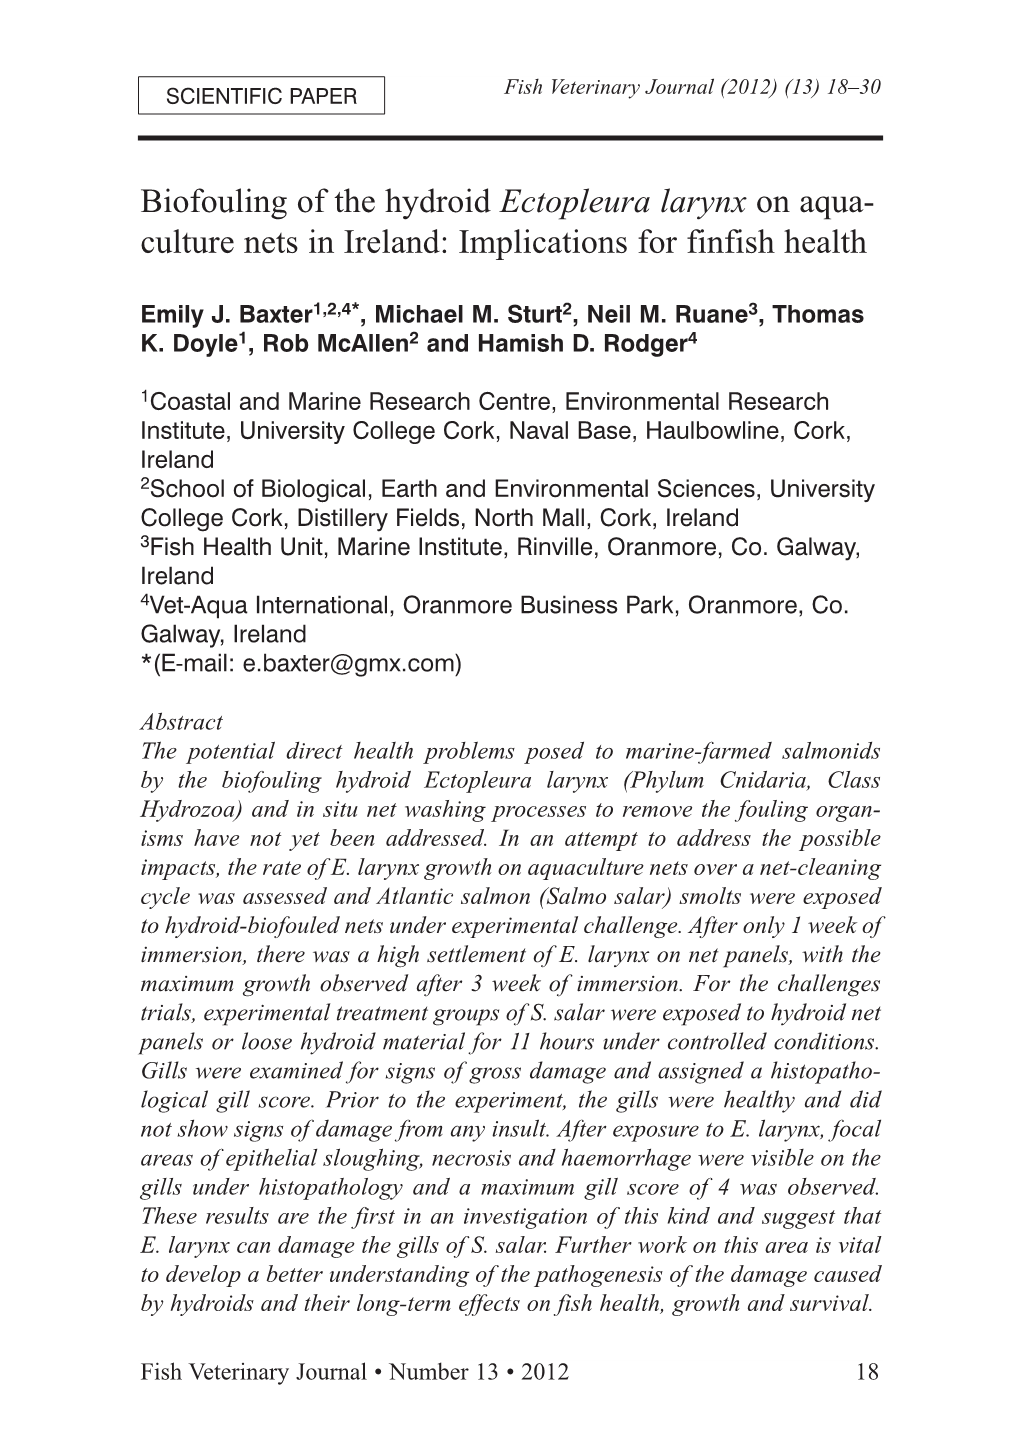 Biofouling of the Hydroid Ectopleura Larynx on Aqua- Culture Nets in Ireland: Implications for Finfish Health